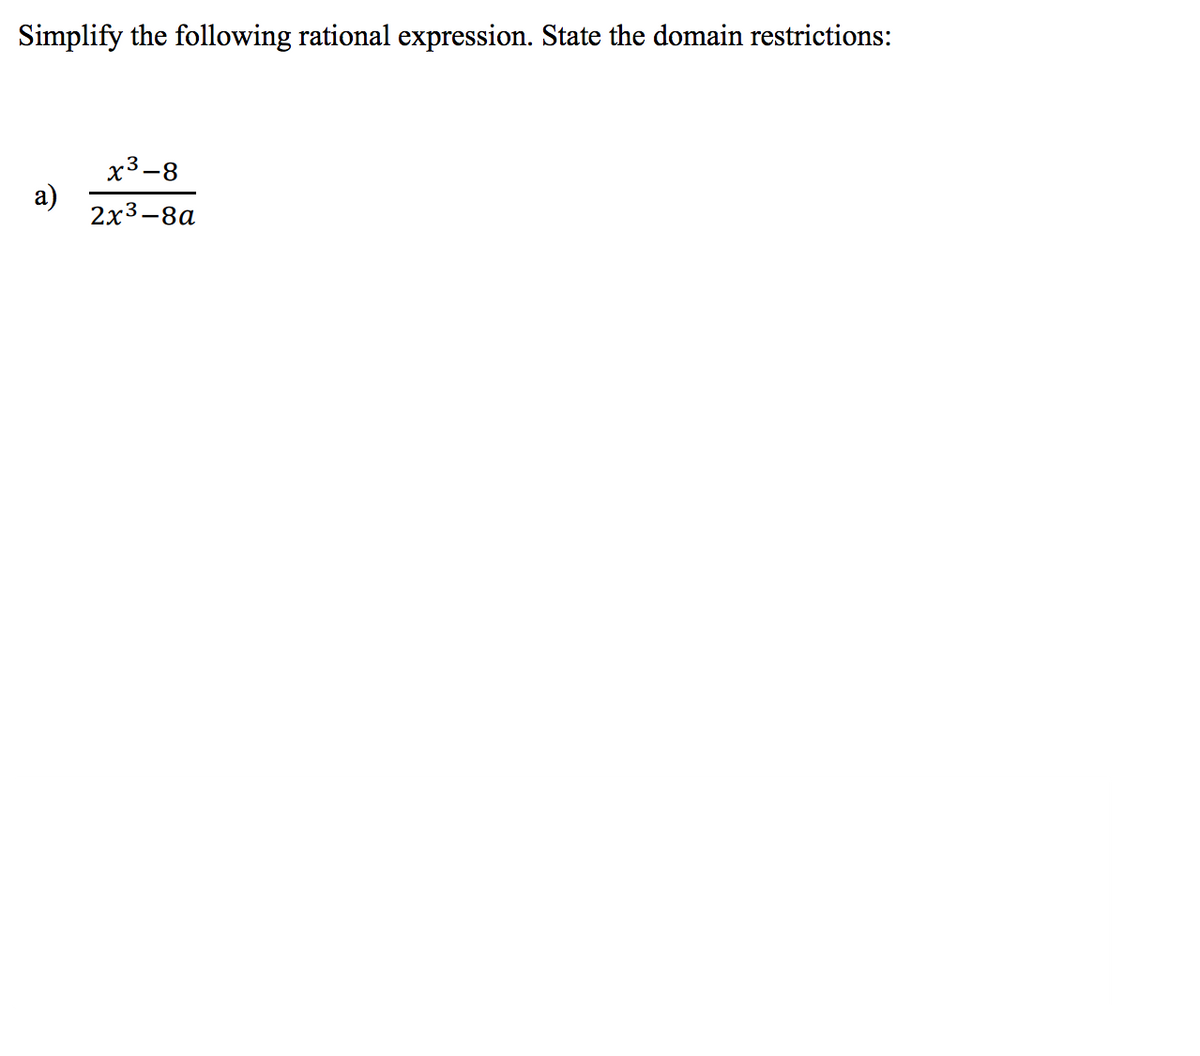 Simplify the following rational expression. State the domain restrictions:
a)
x³-8
2x³-8a